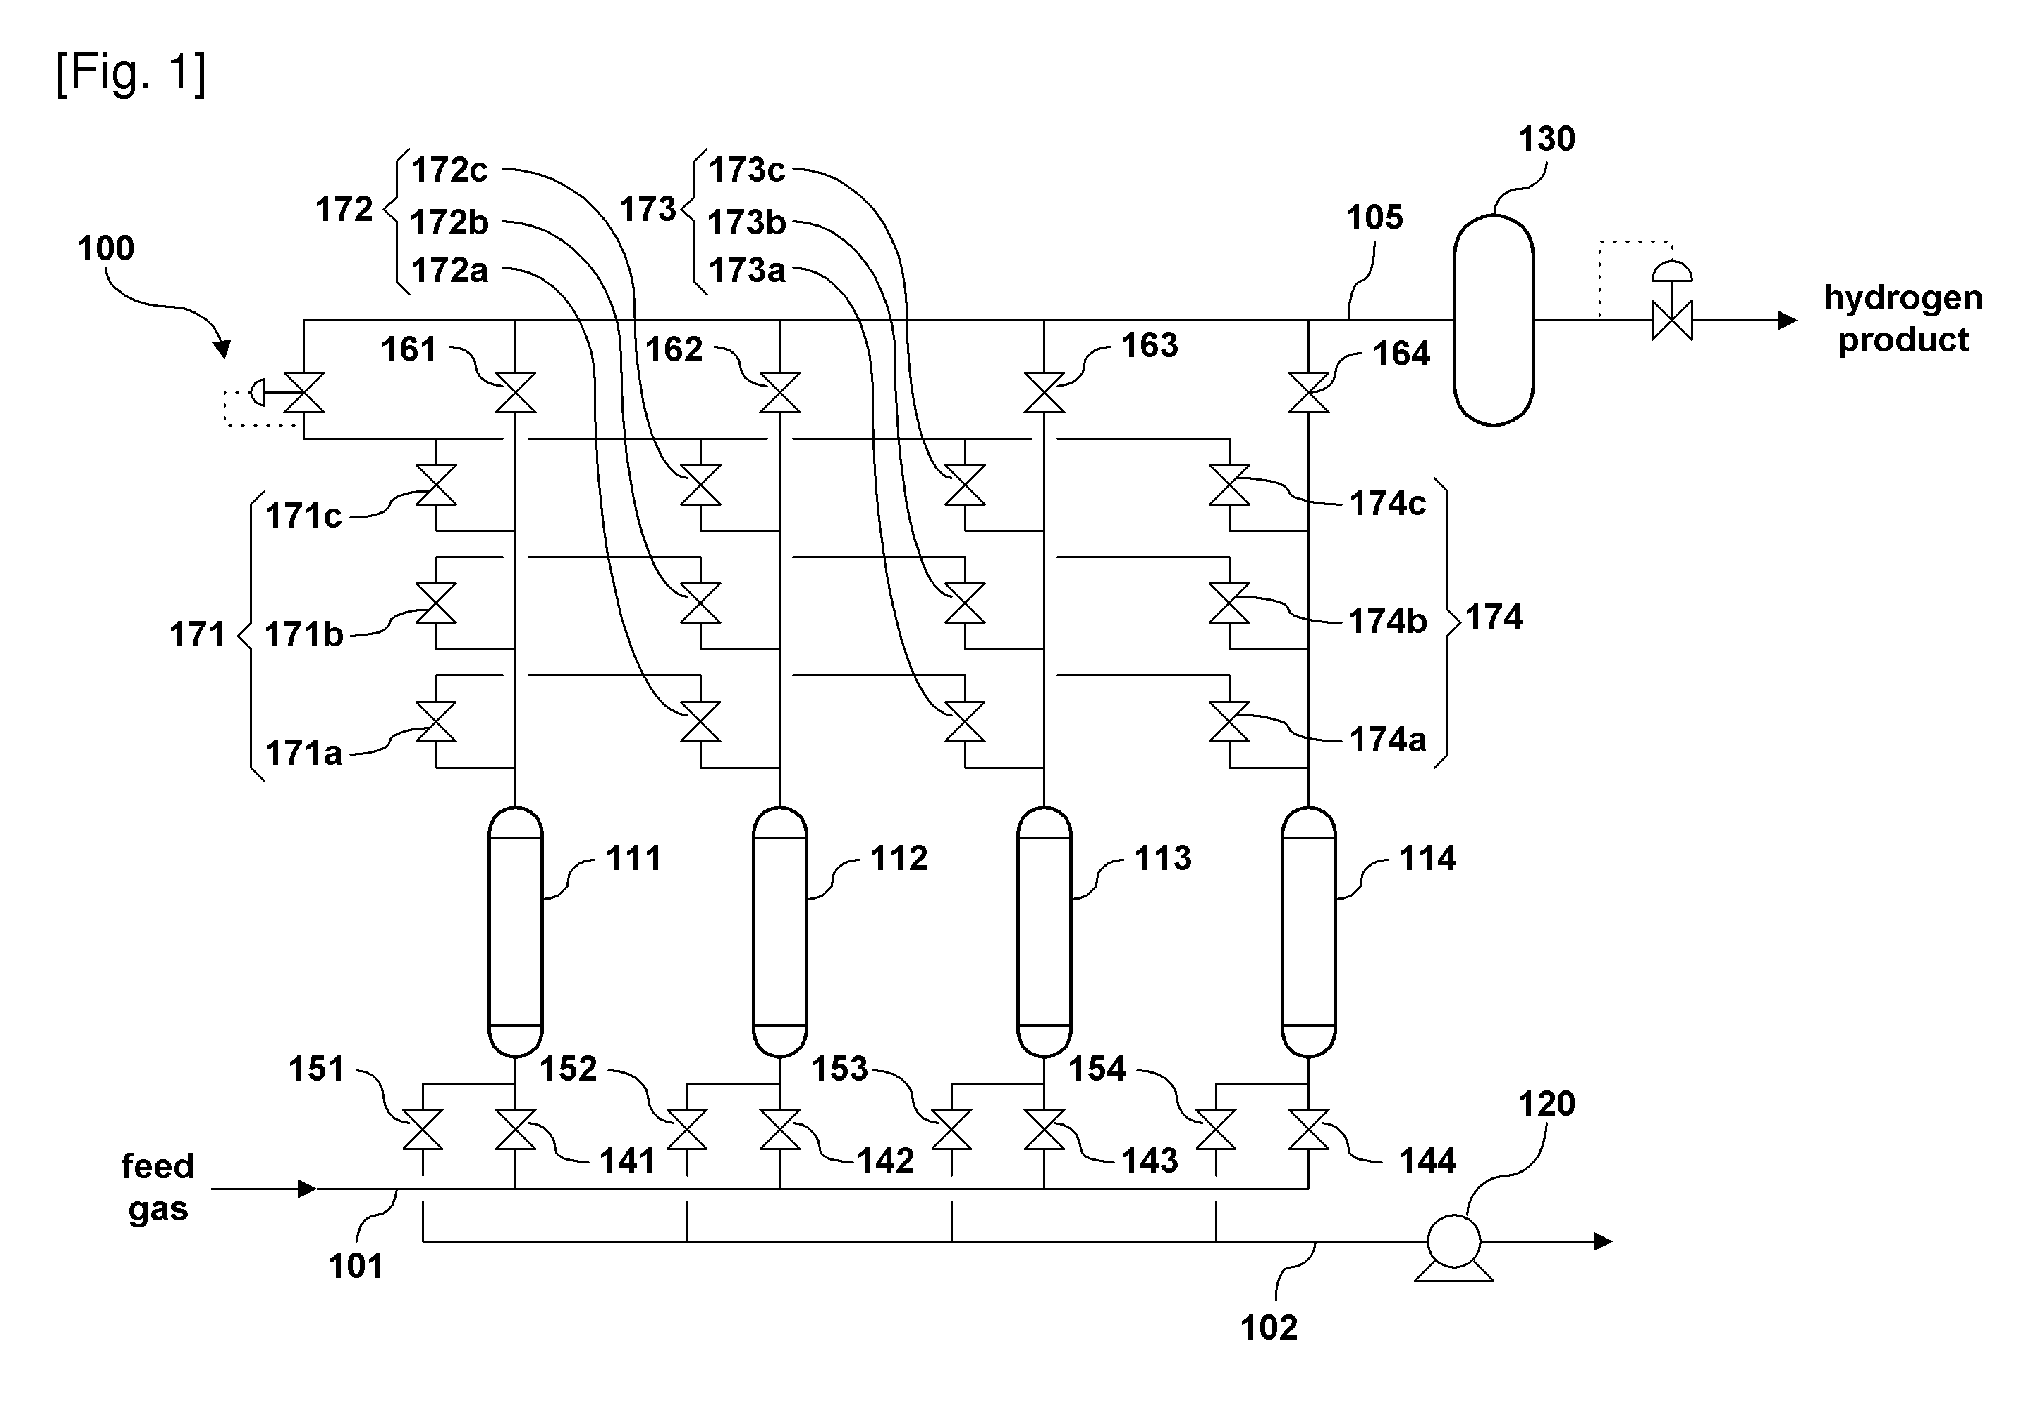 Pressure swing adsorption apparatus and method for hydrogen purification using the same